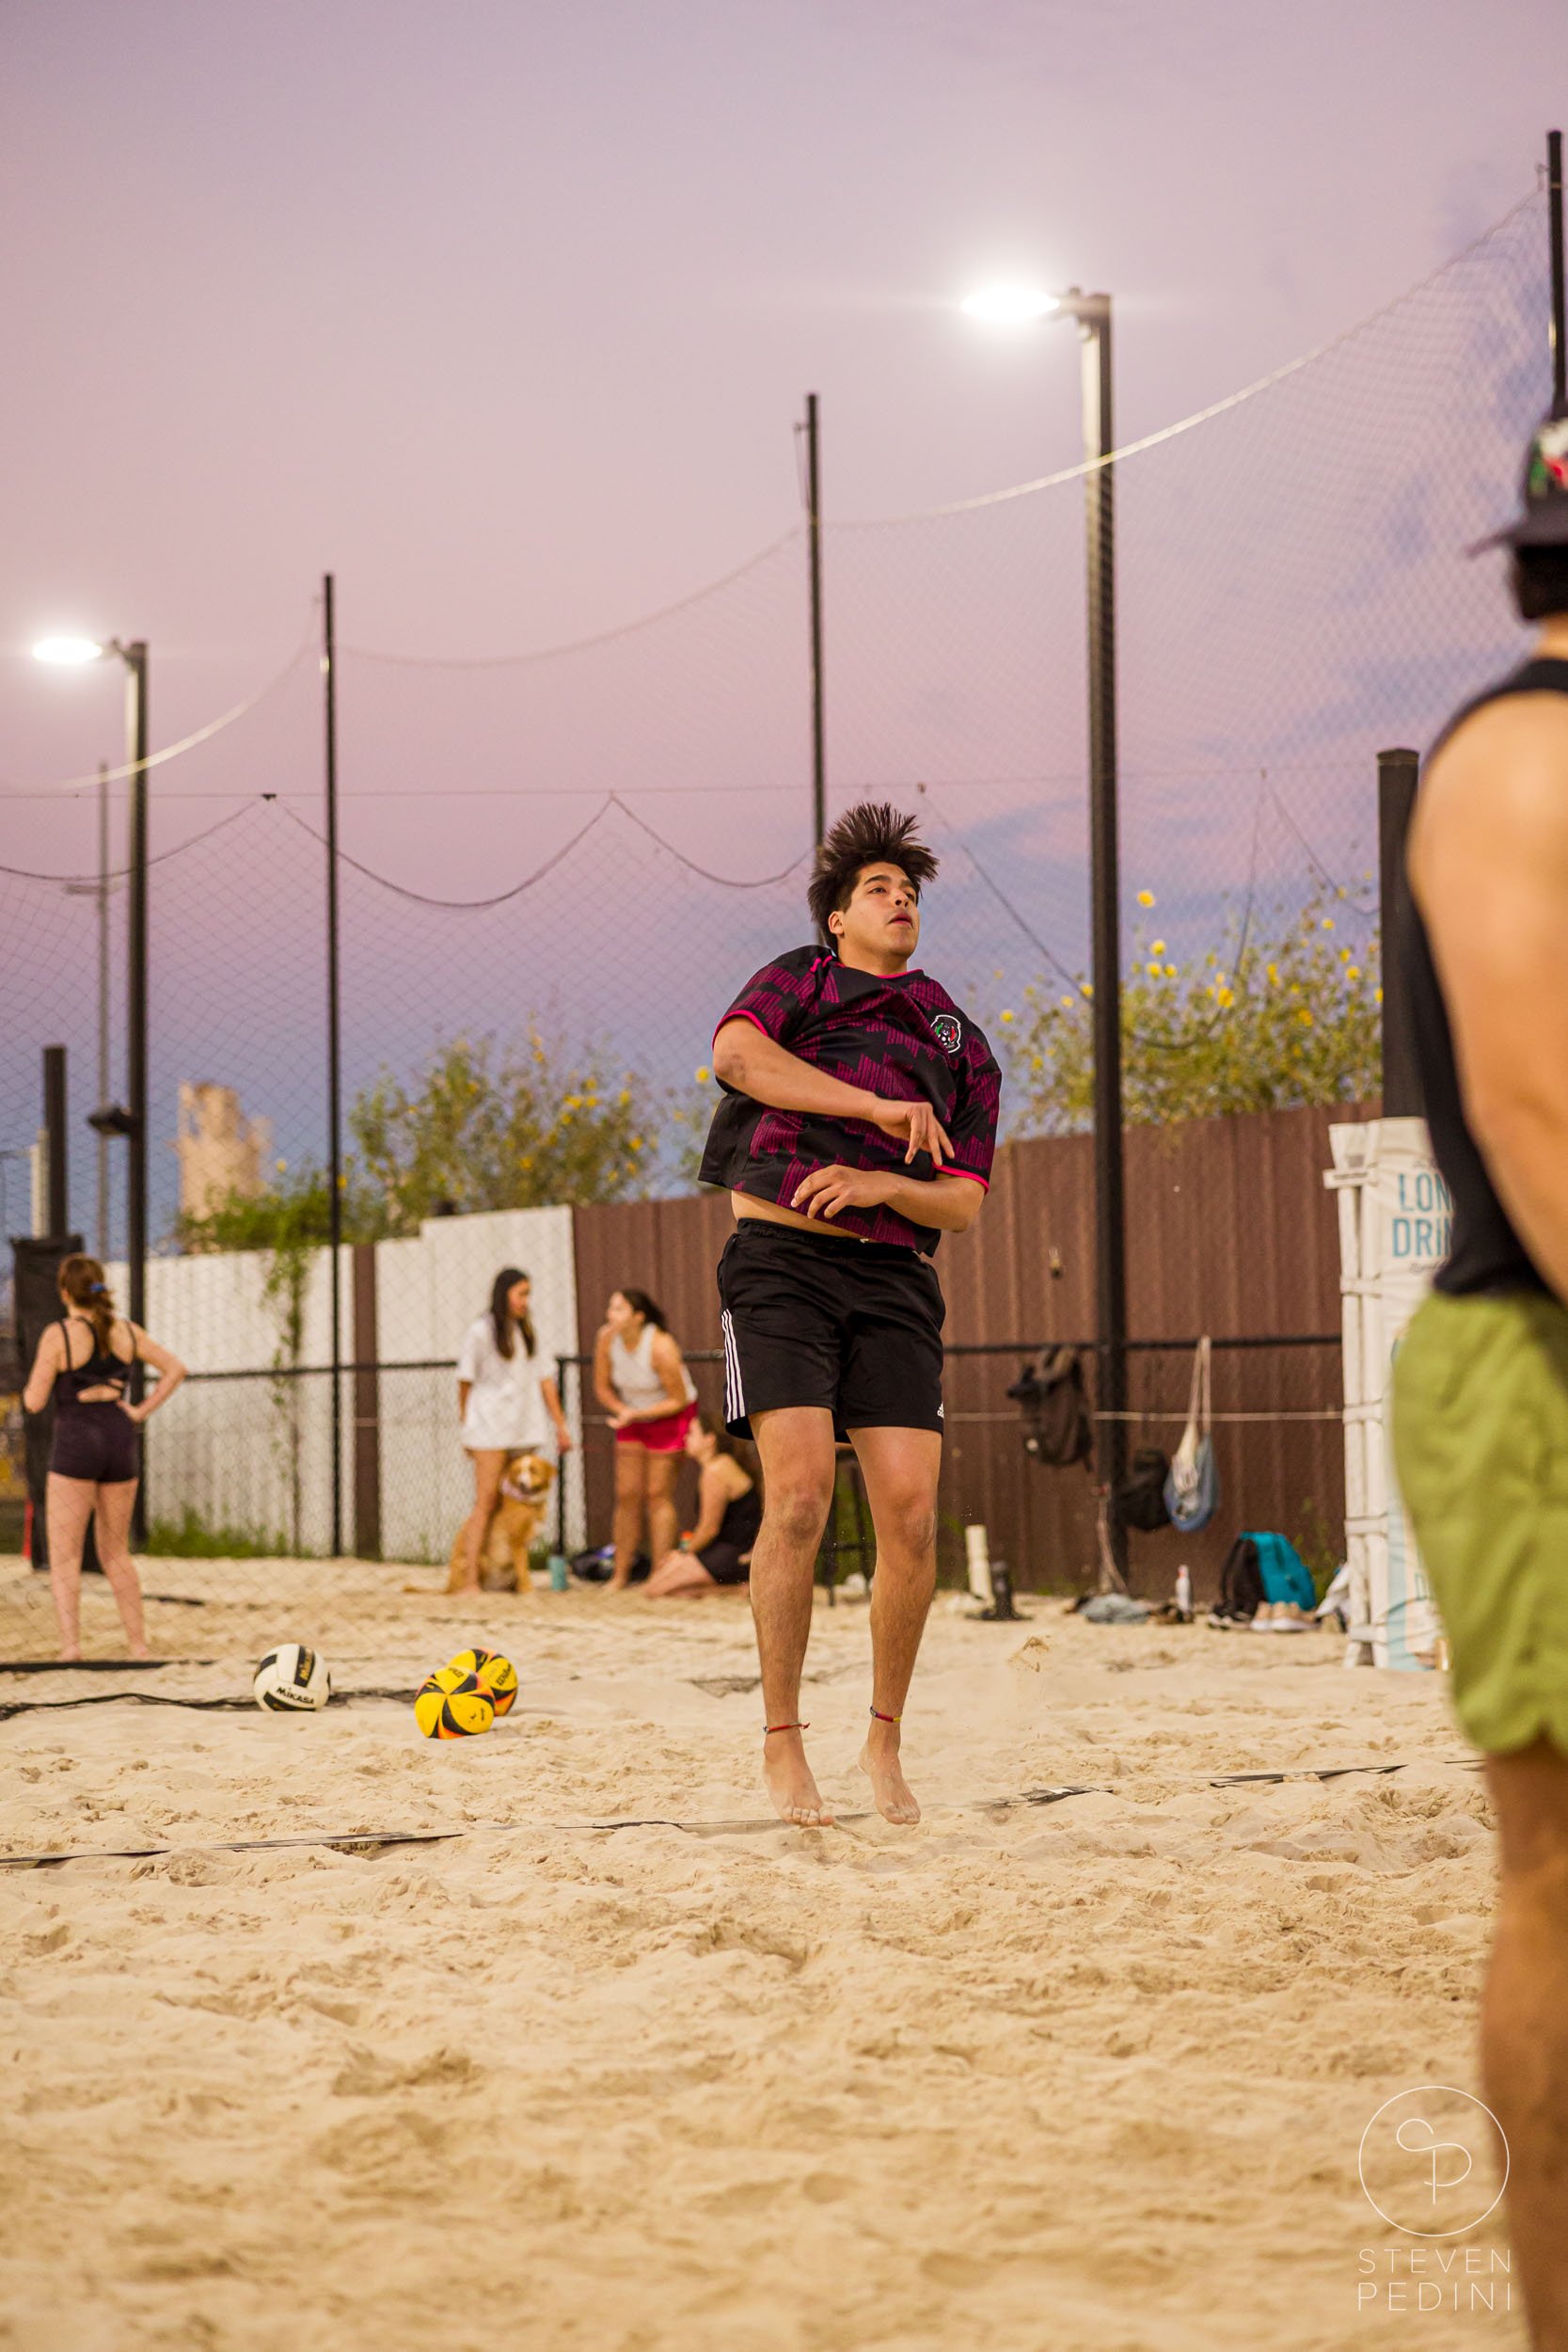 Steven Pedini Photography - Bumpy Pickle - Sand Volleyball - Houston TX - World Cup of Volleyball - 00286.jpg